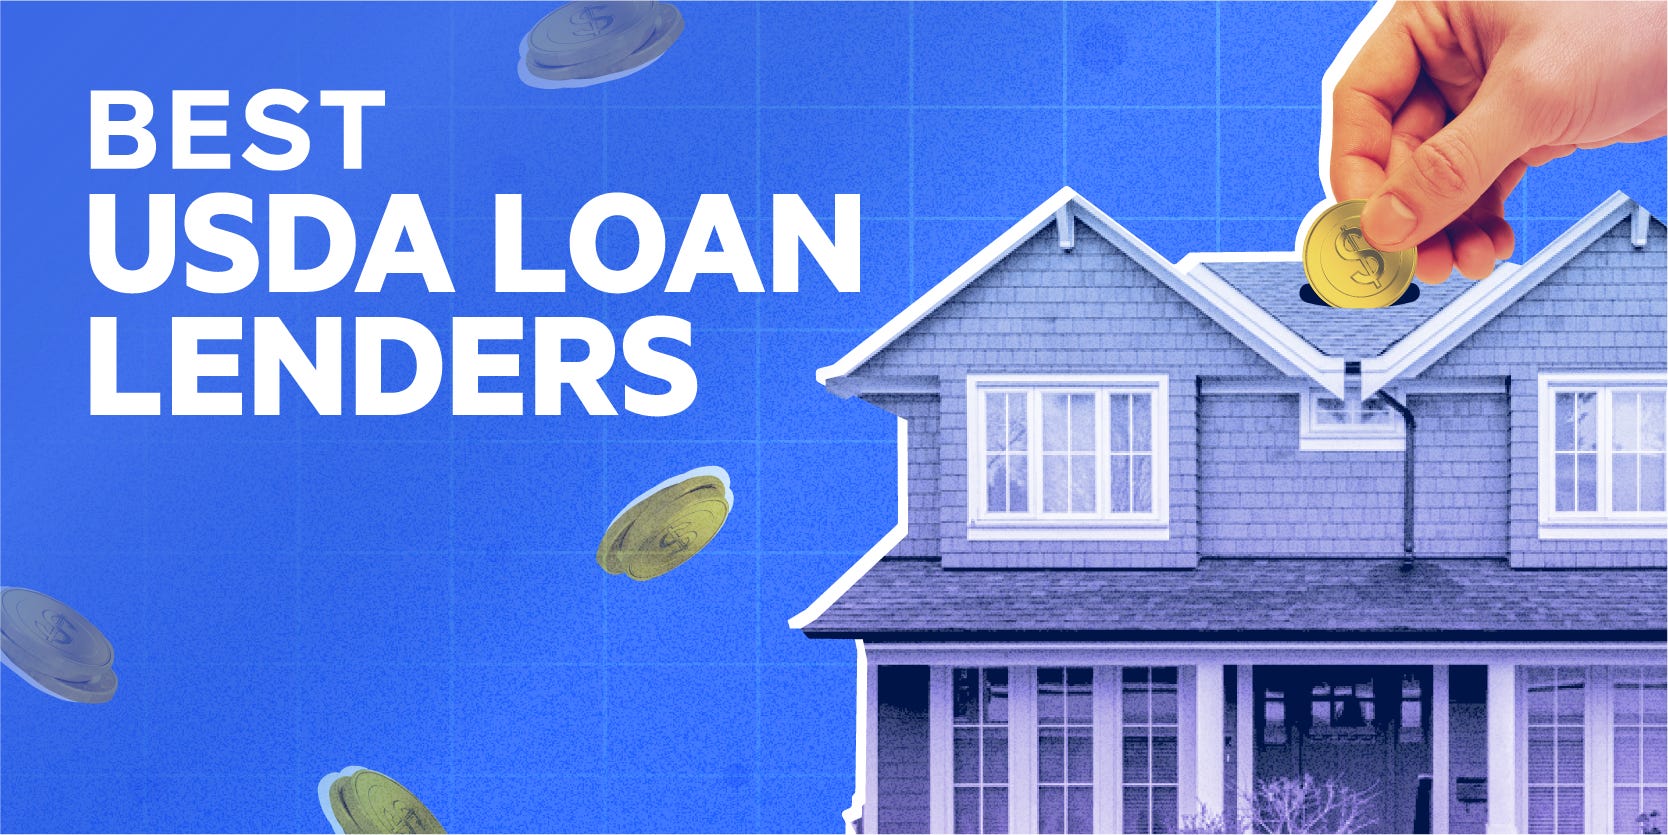 Best USDA loan lenders text with person hand inserting coin house